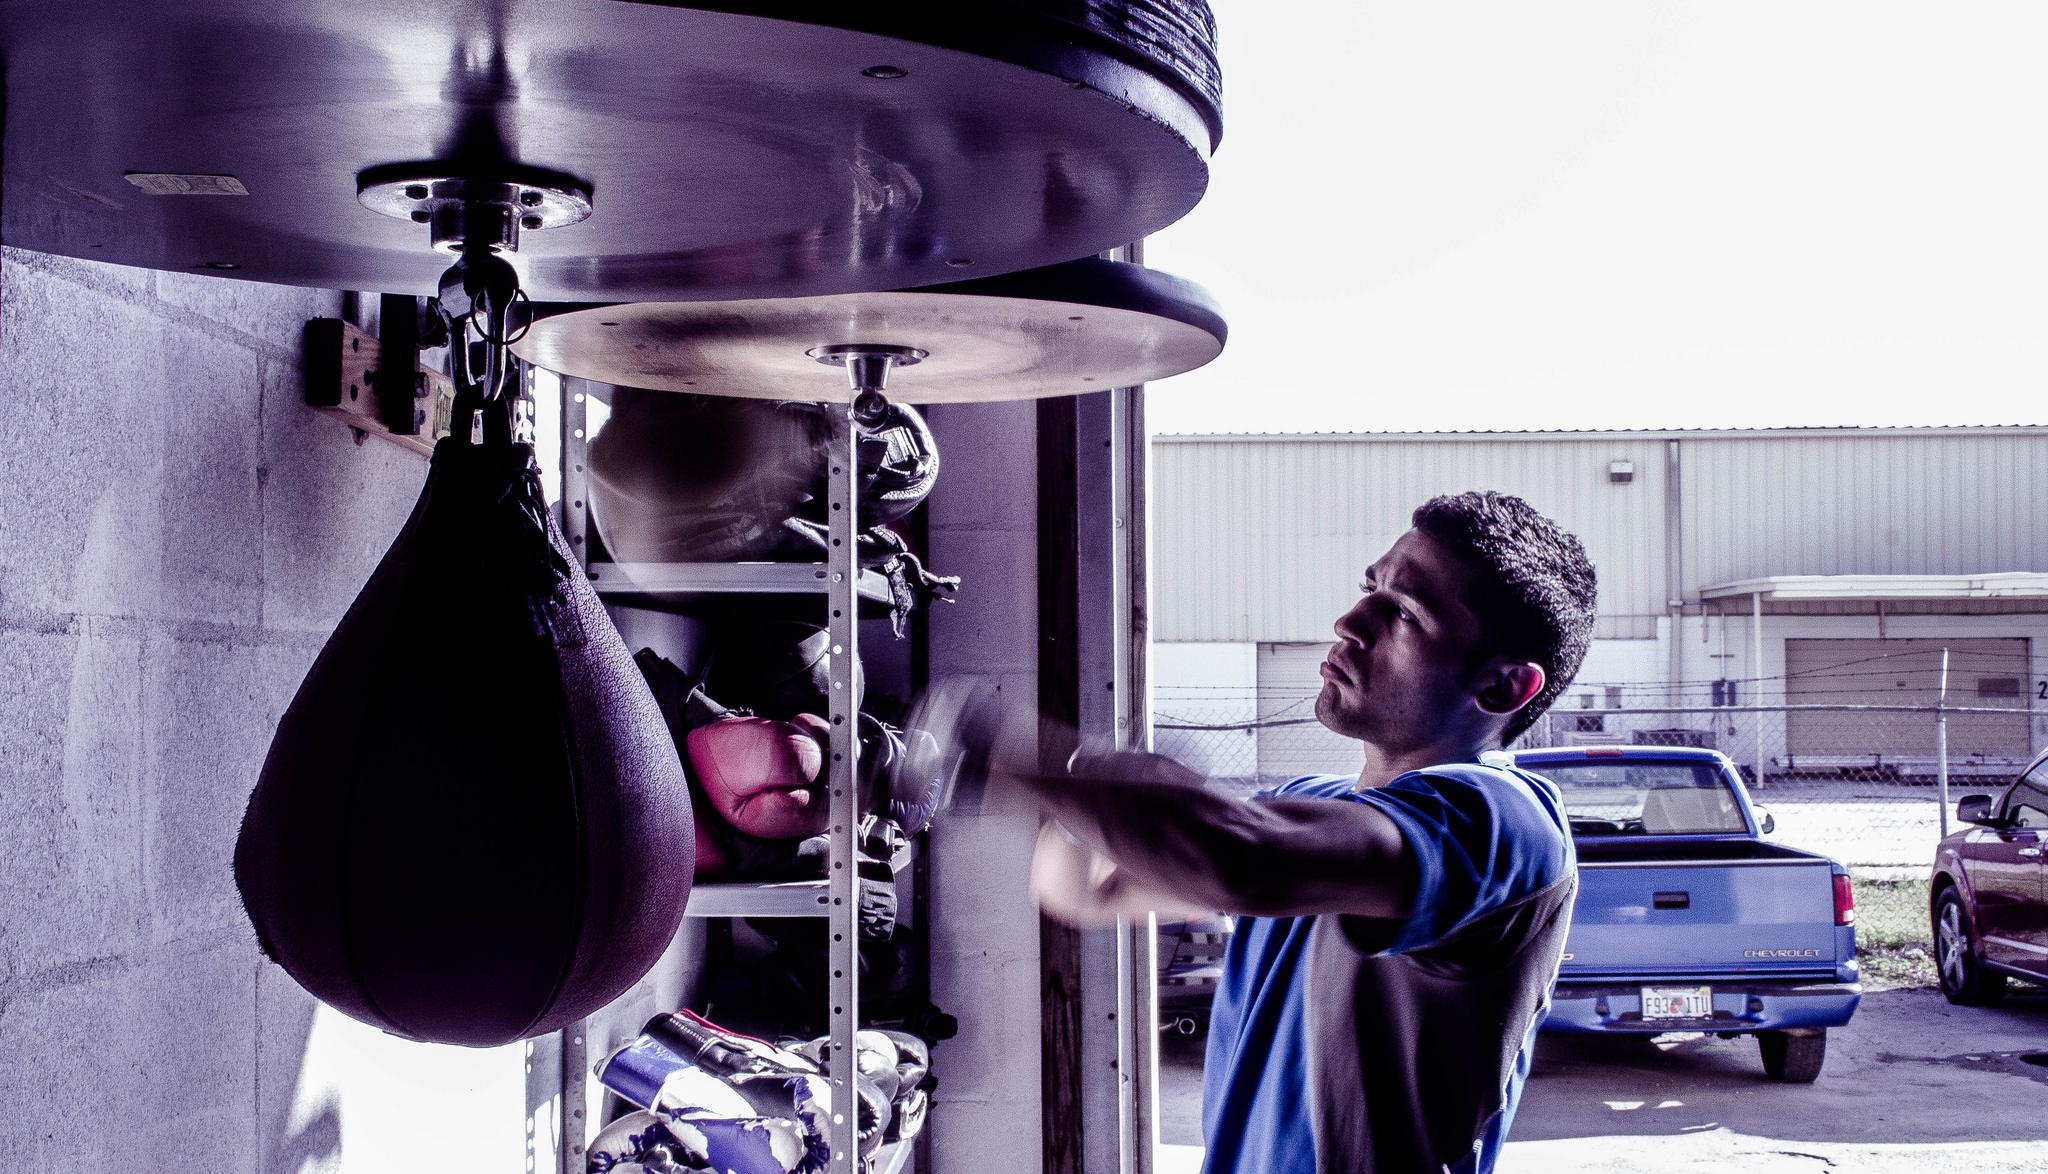 The speed bag offers sports specific training for fighters.